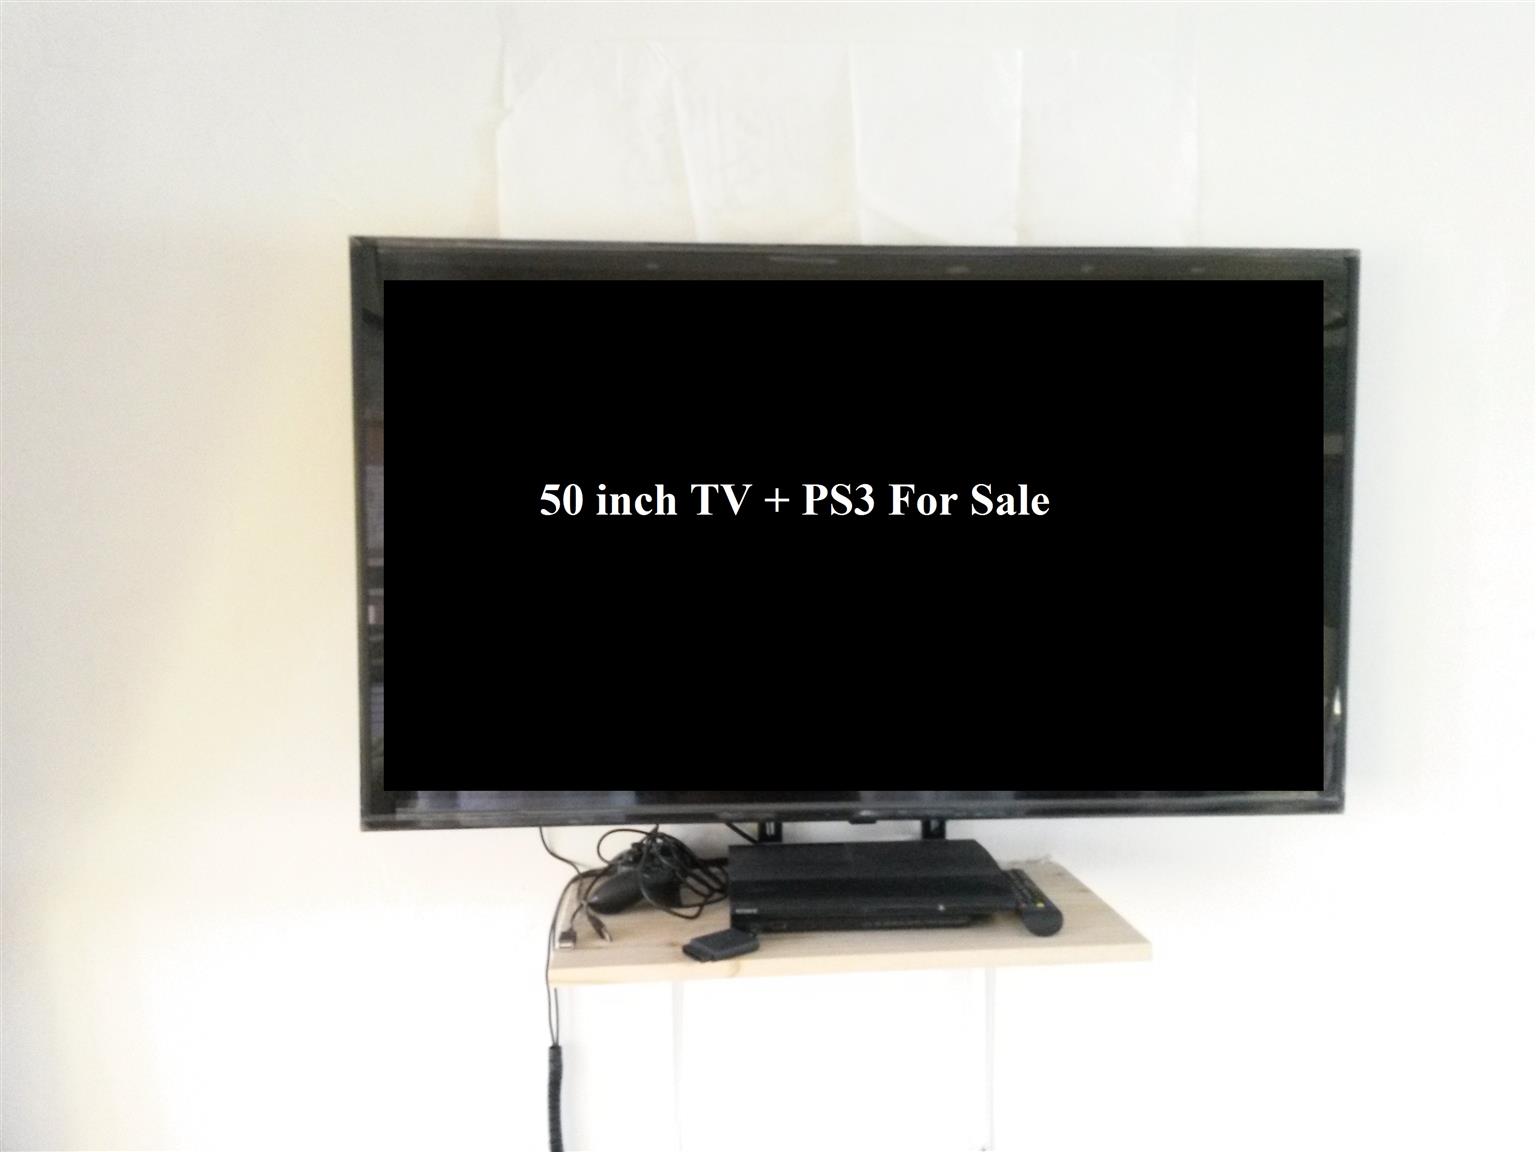 AIM 50 inch LED TV + PS3 For Sale